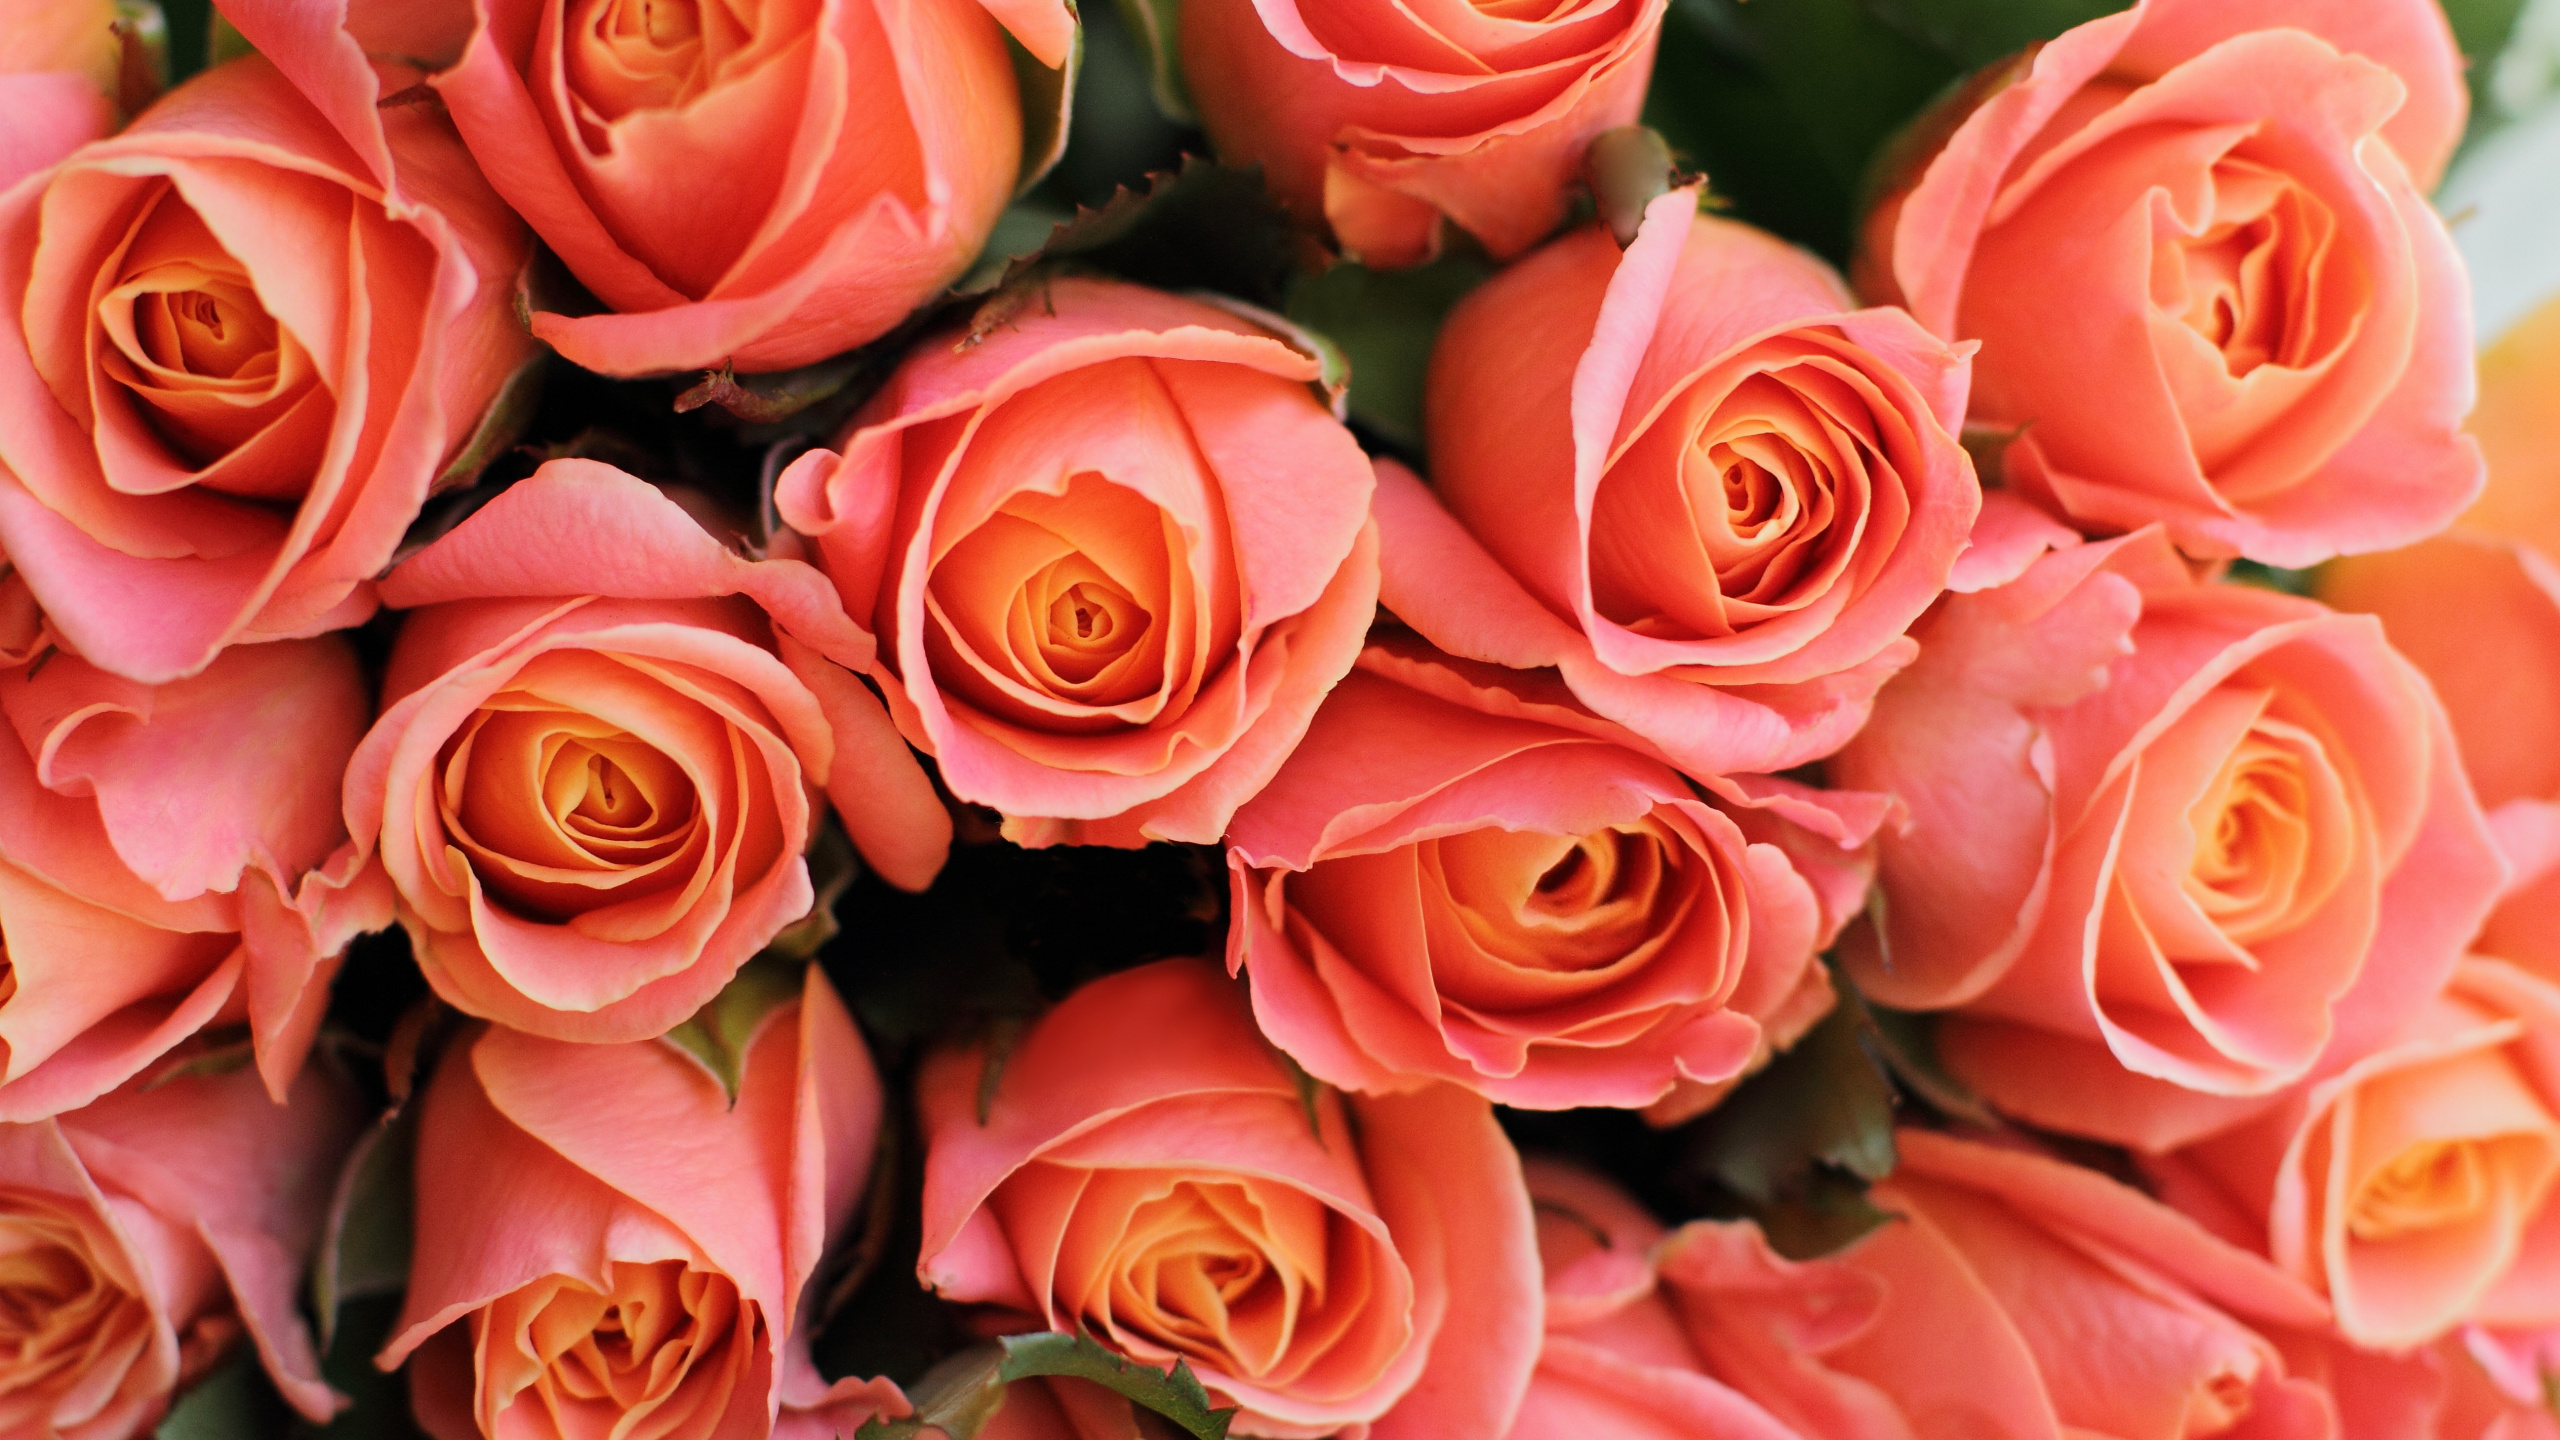 Pink Roses in Close up Photography. Wallpaper in 2560x1440 Resolution